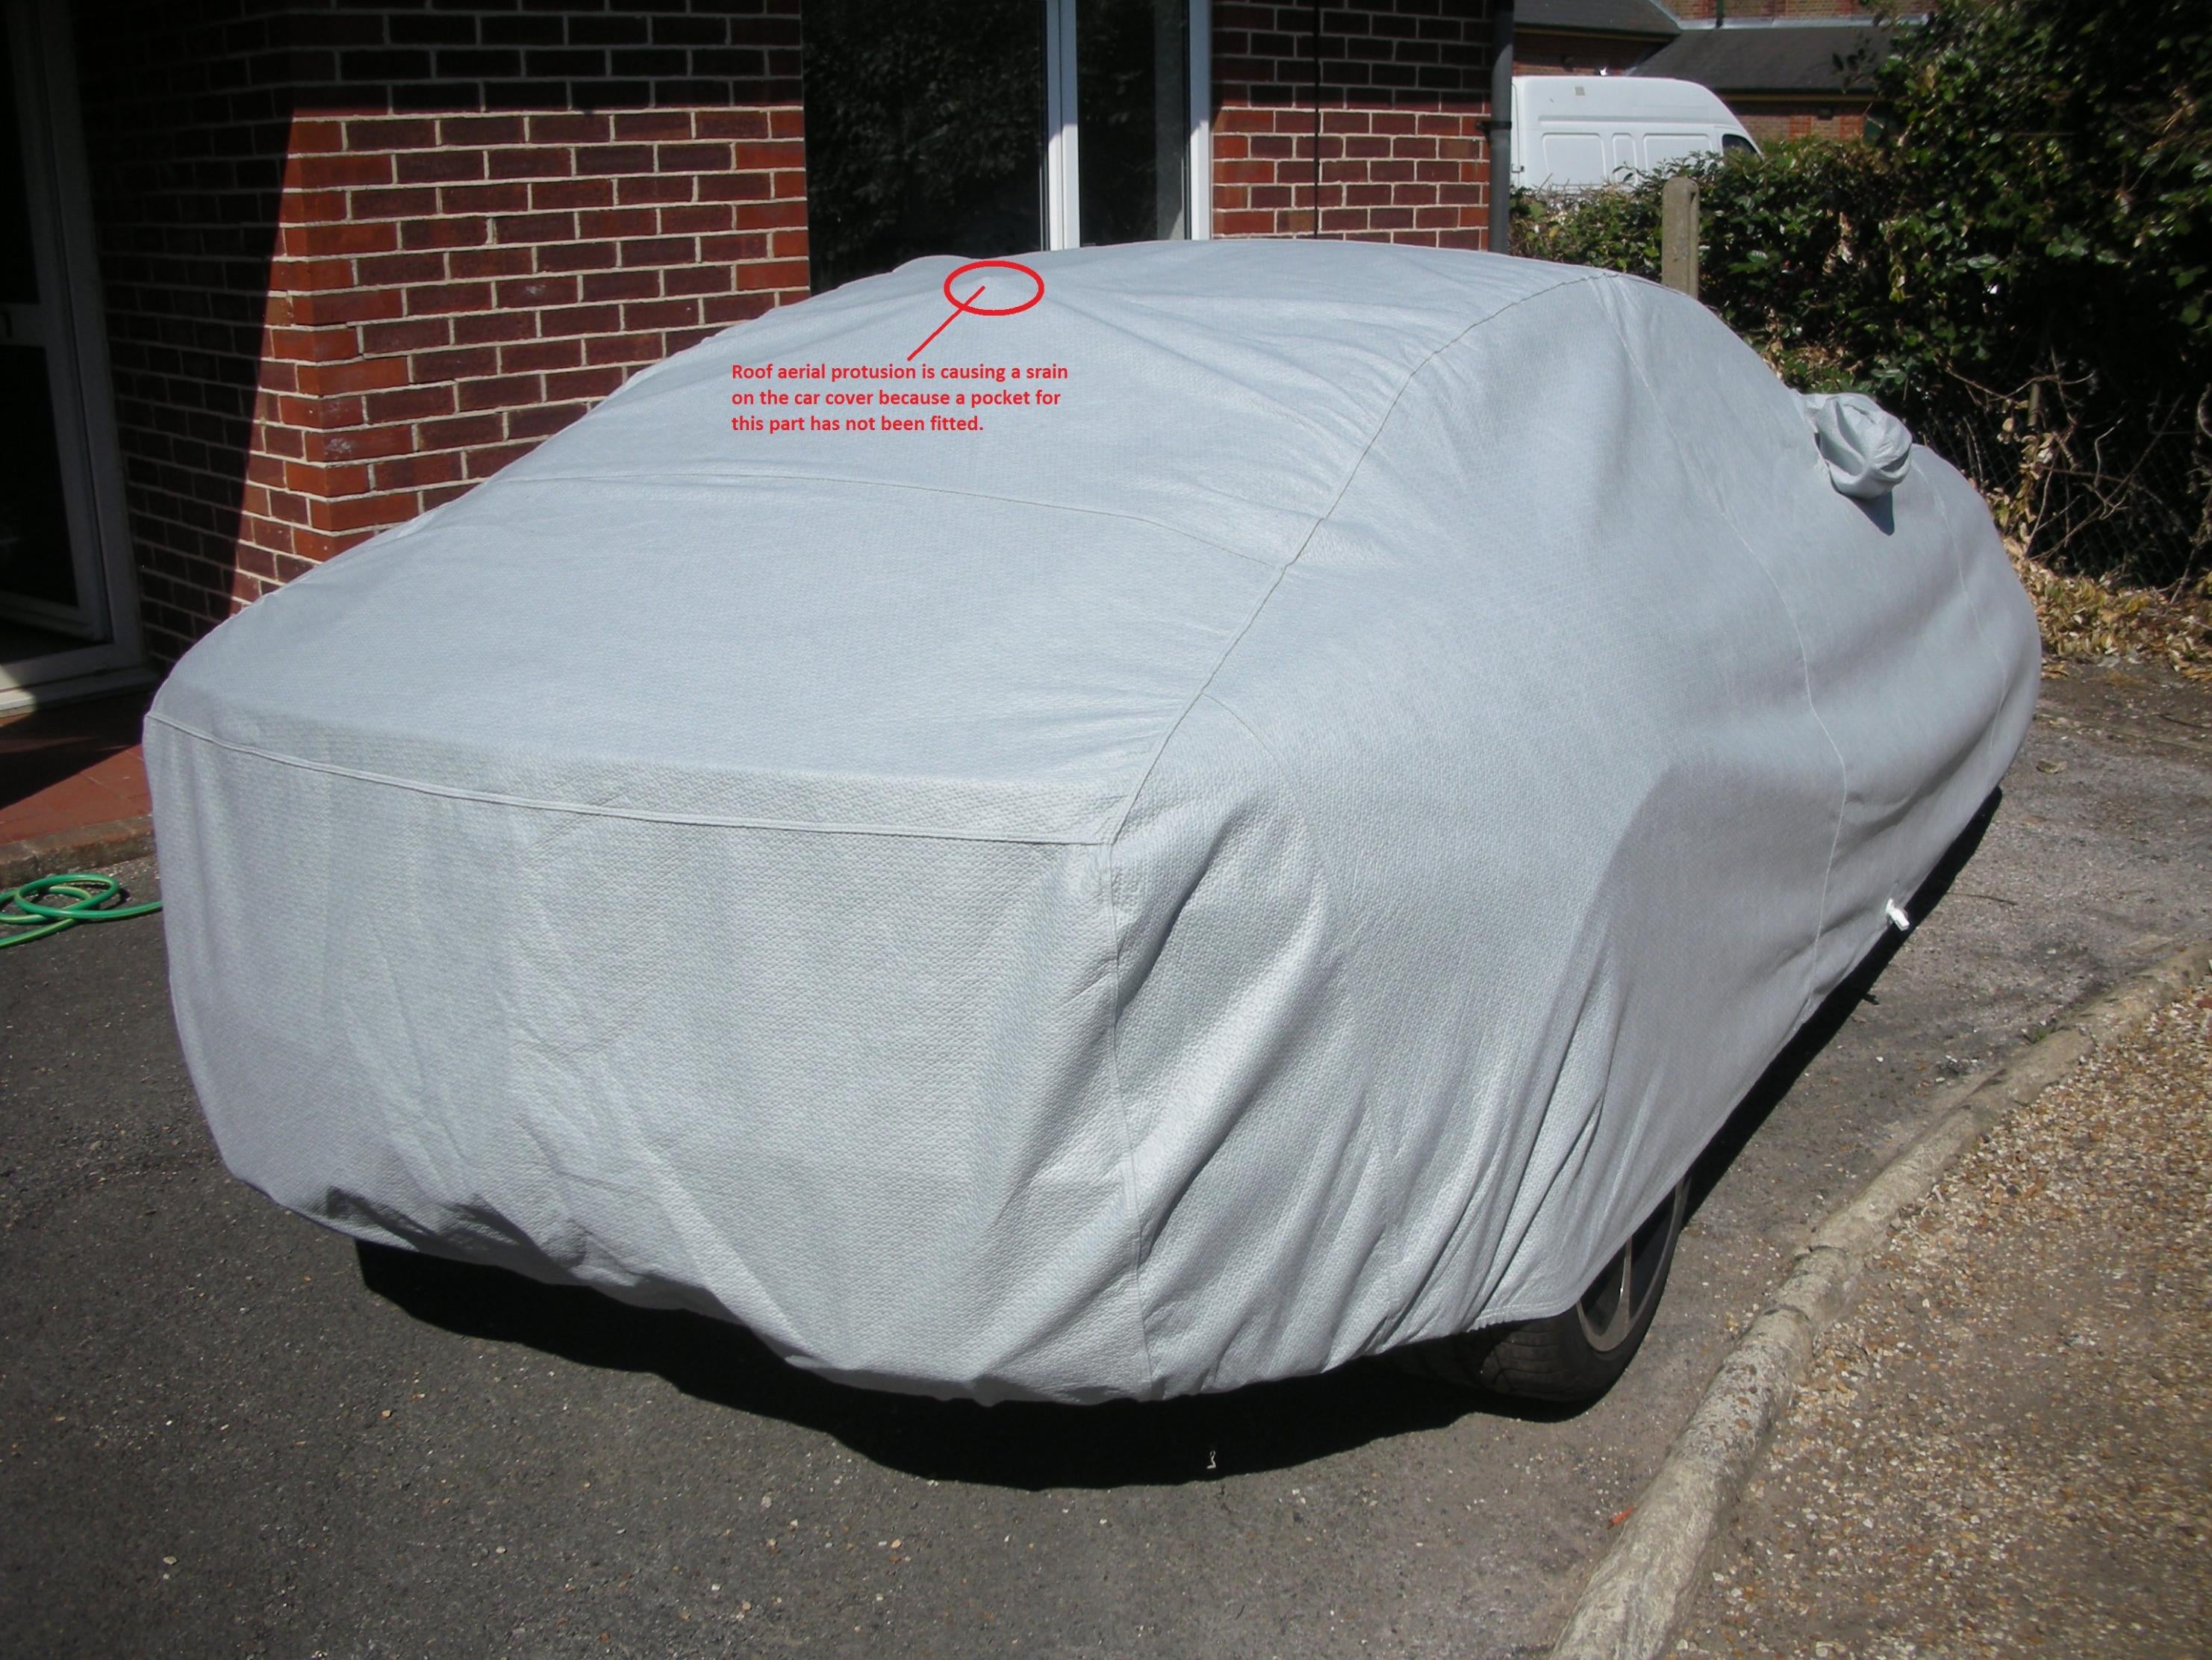 Beware of the Jaguar F- Type Coupe Car Cover